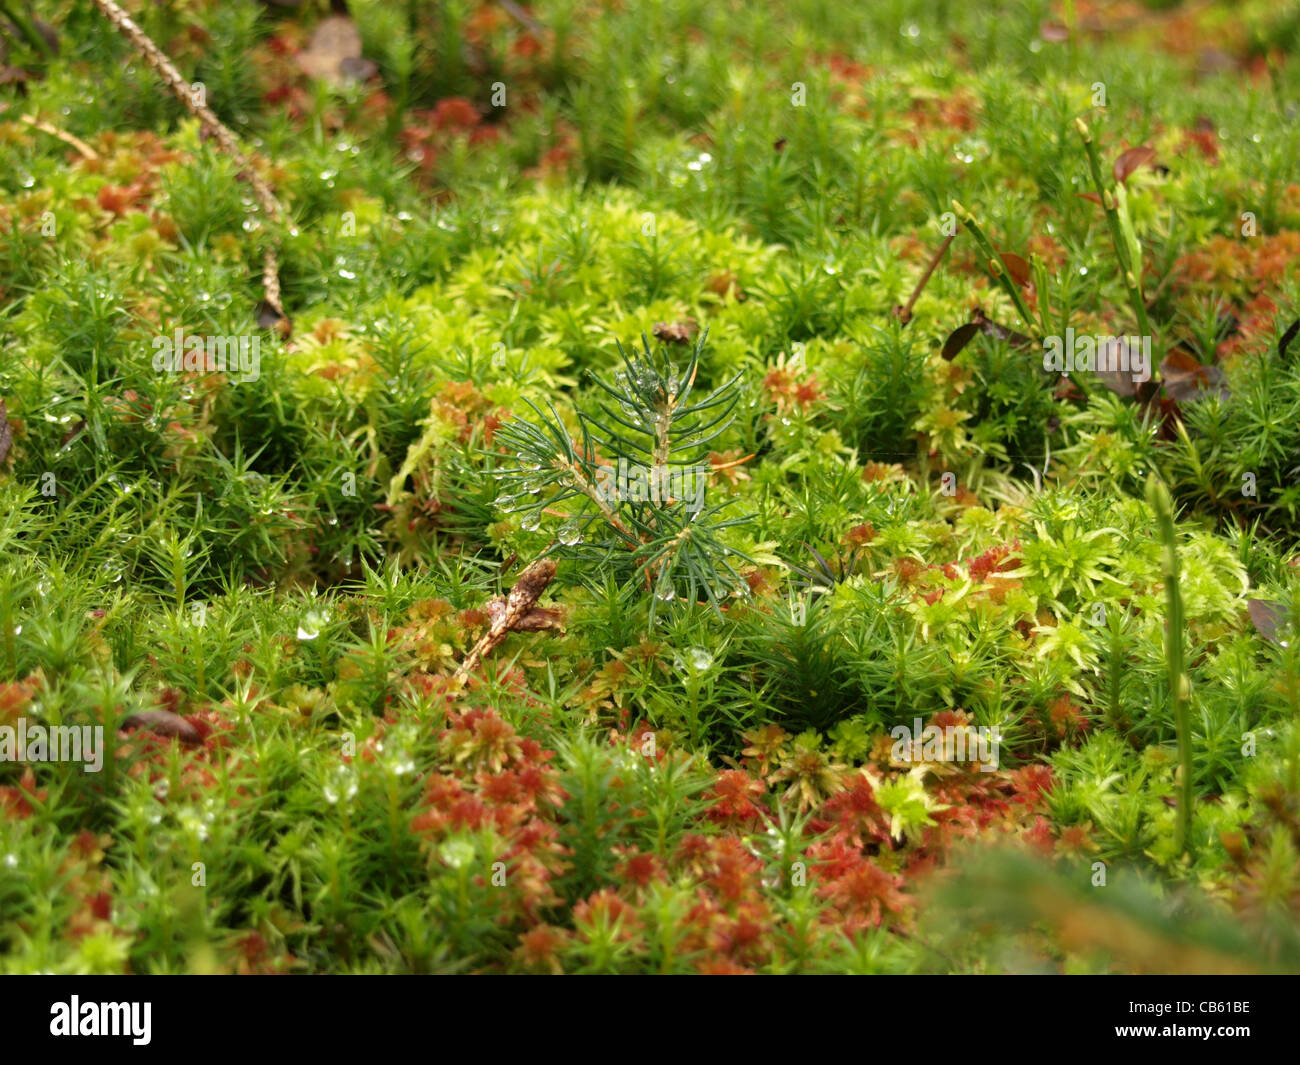 young fir with haircap moss / Polytrichum formosum, peat moss / Sphagnum / junge Tanne,  Frauenhaarmoos, Torfmoos Stock Photo